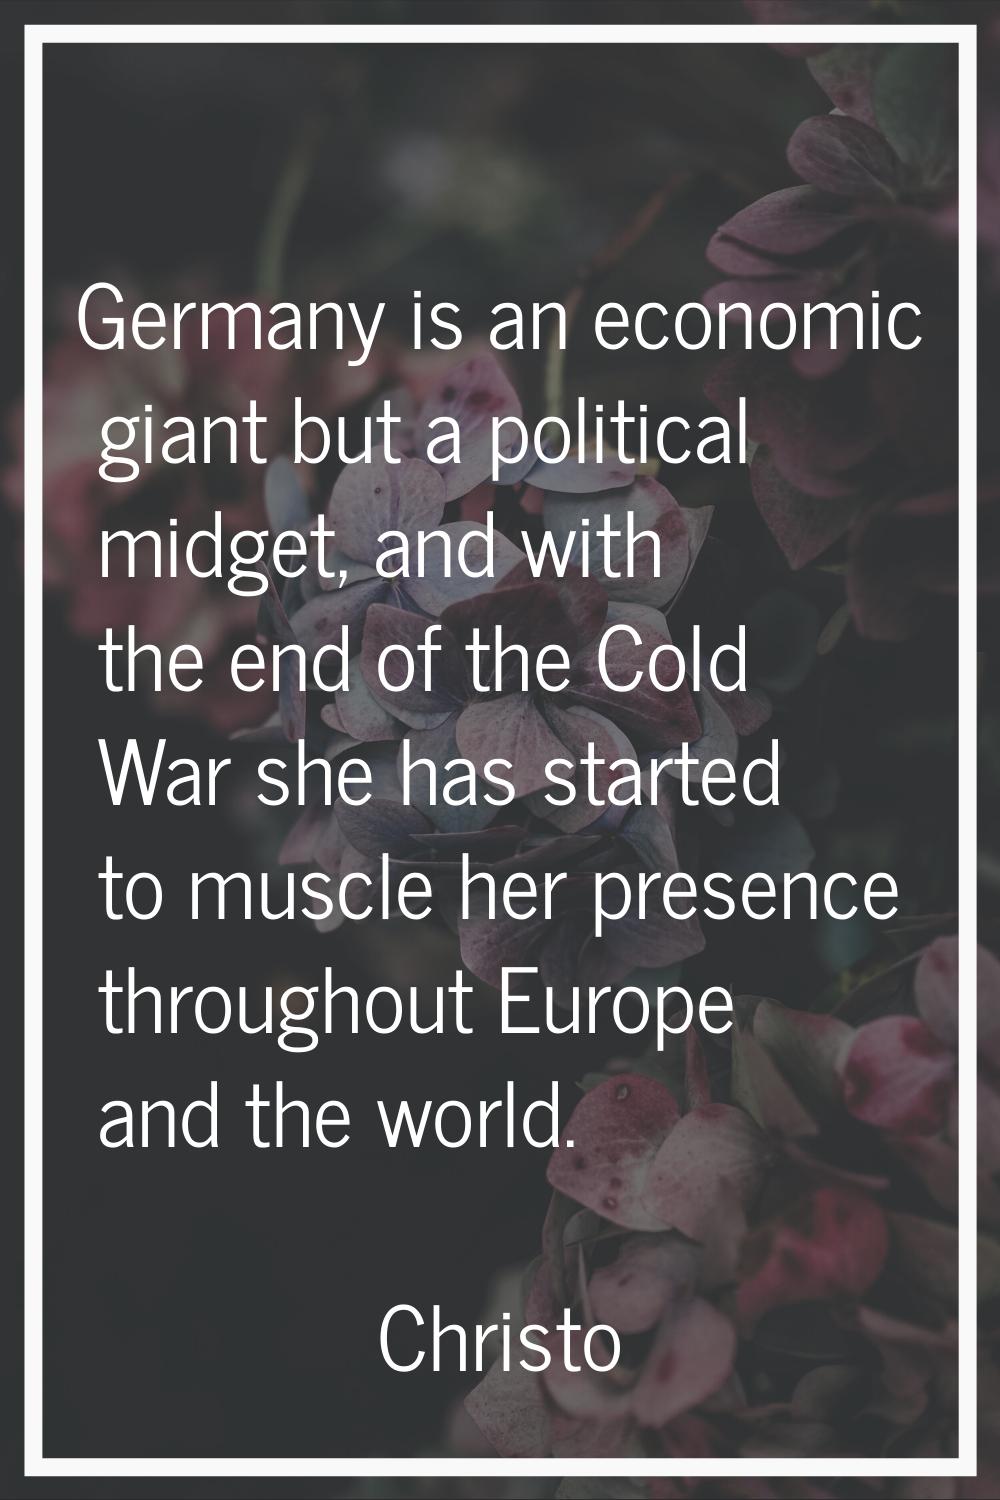 Germany is an economic giant but a political midget, and with the end of the Cold War she has start